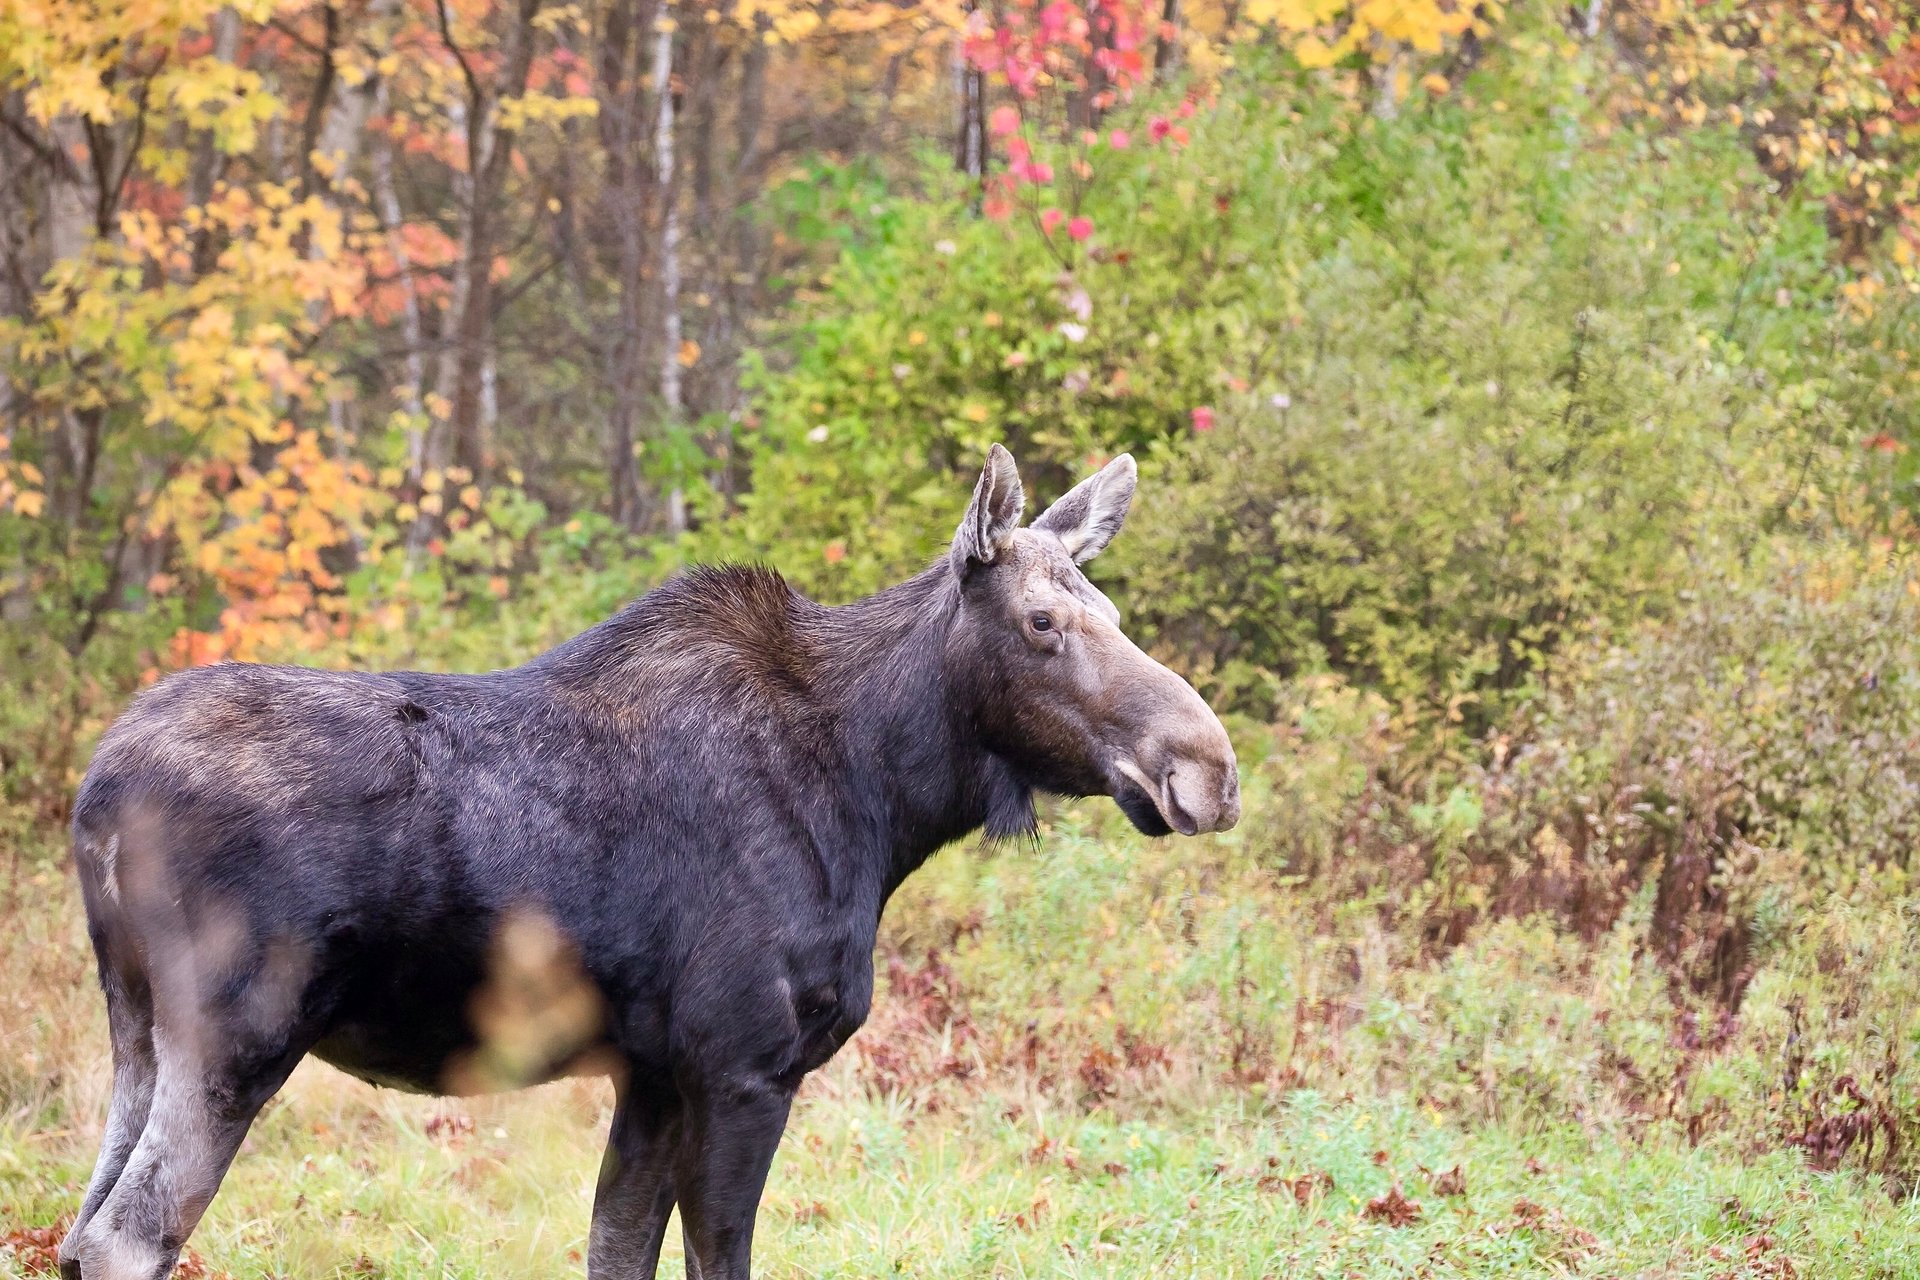 A moose without antlers standing in front of a forest.